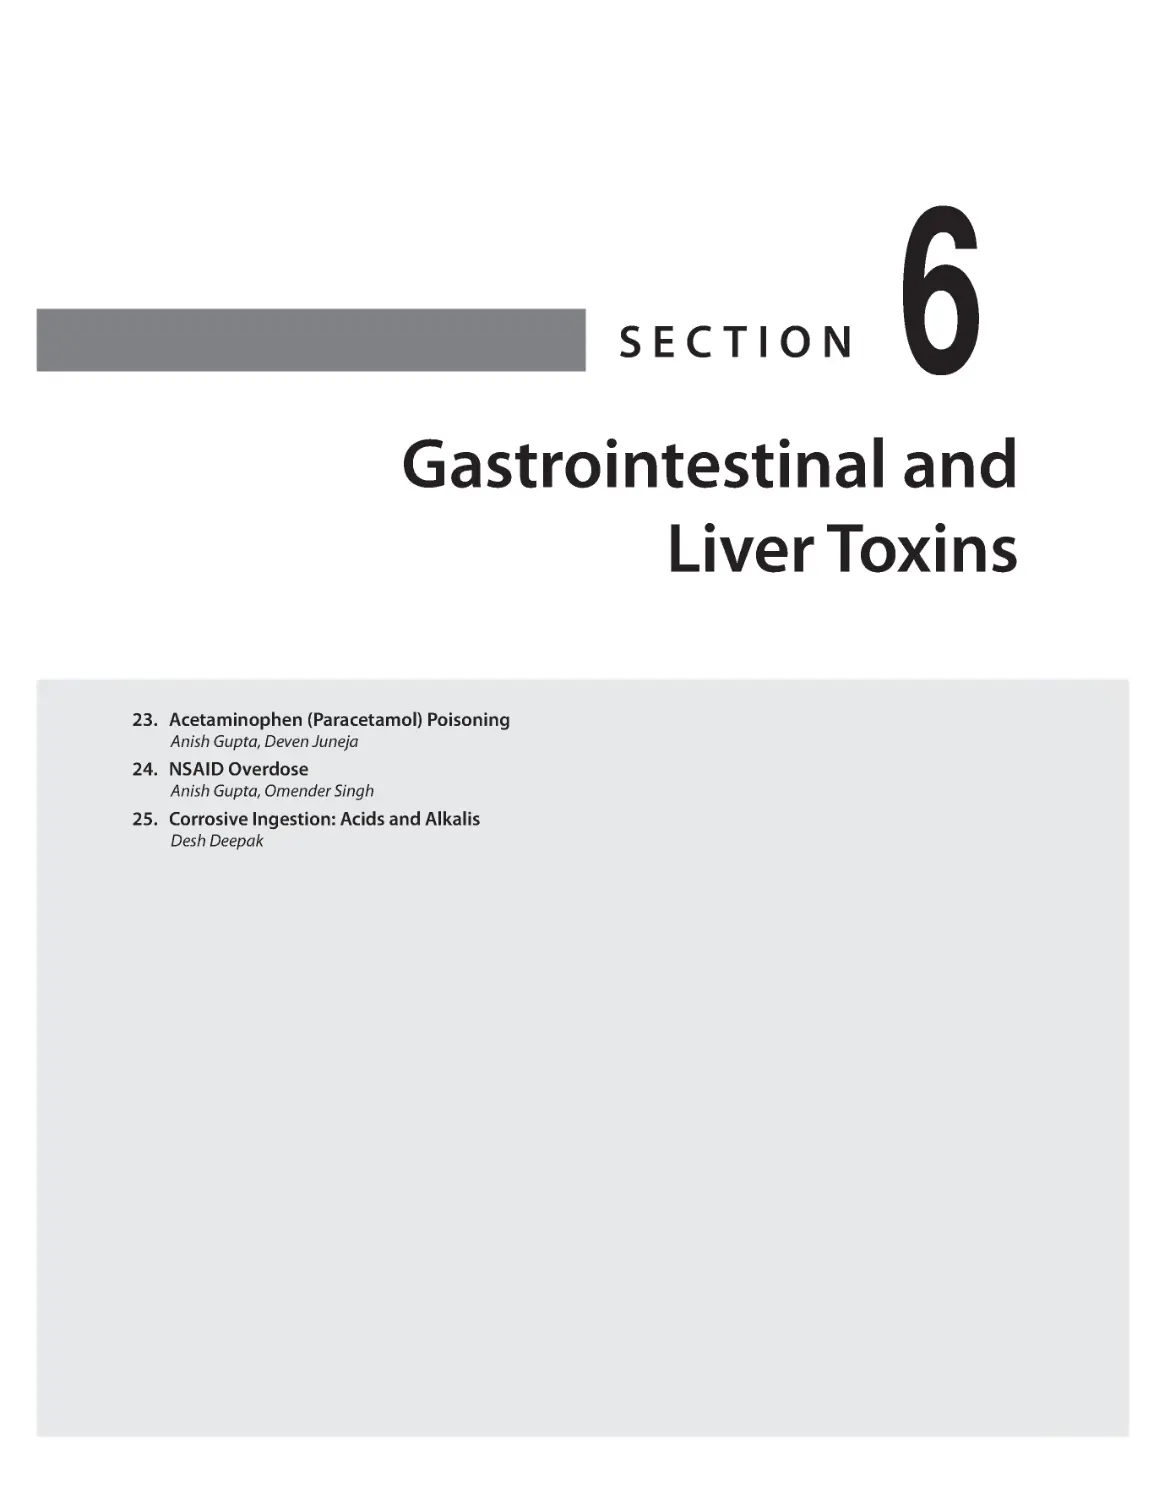 SECTION 6: Gastrointestinal and Liver Toxins